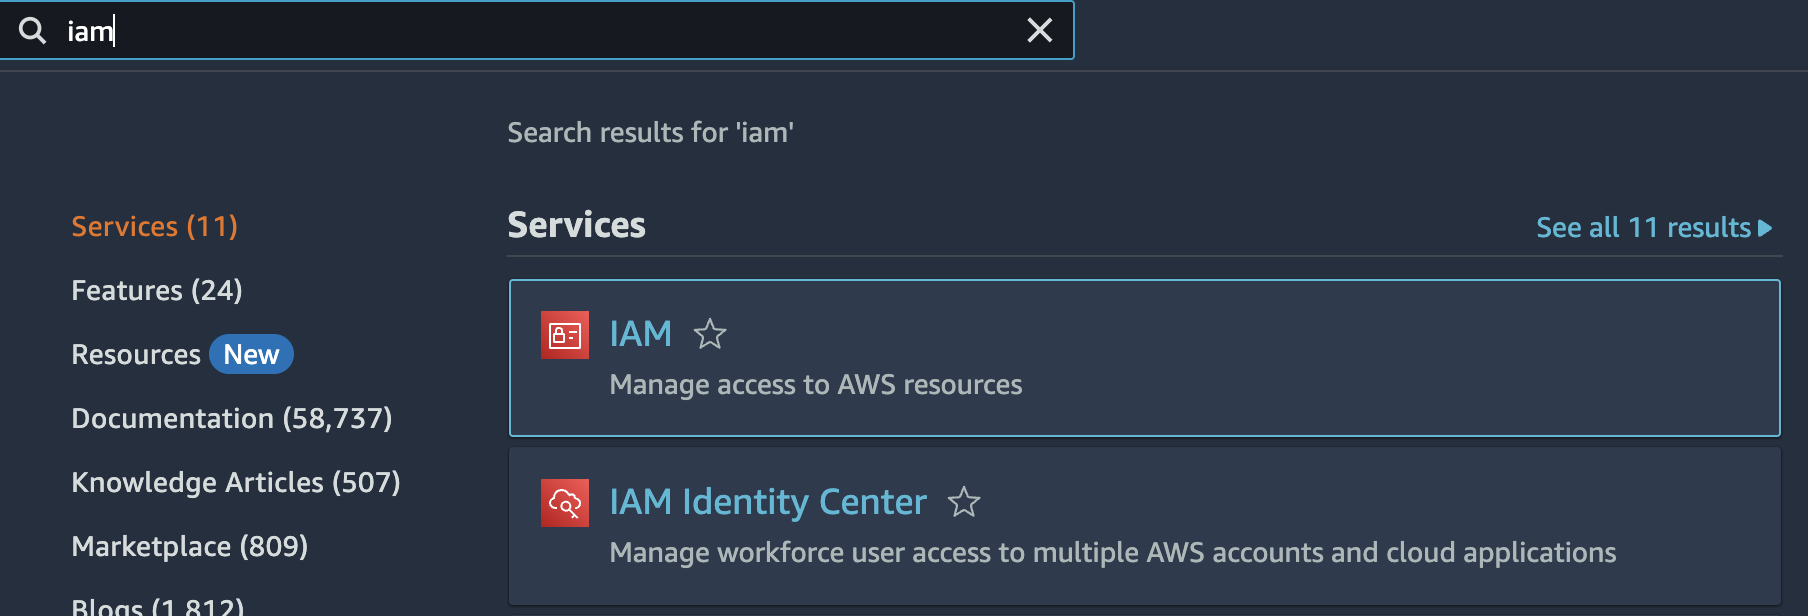 AWS search for "iam"